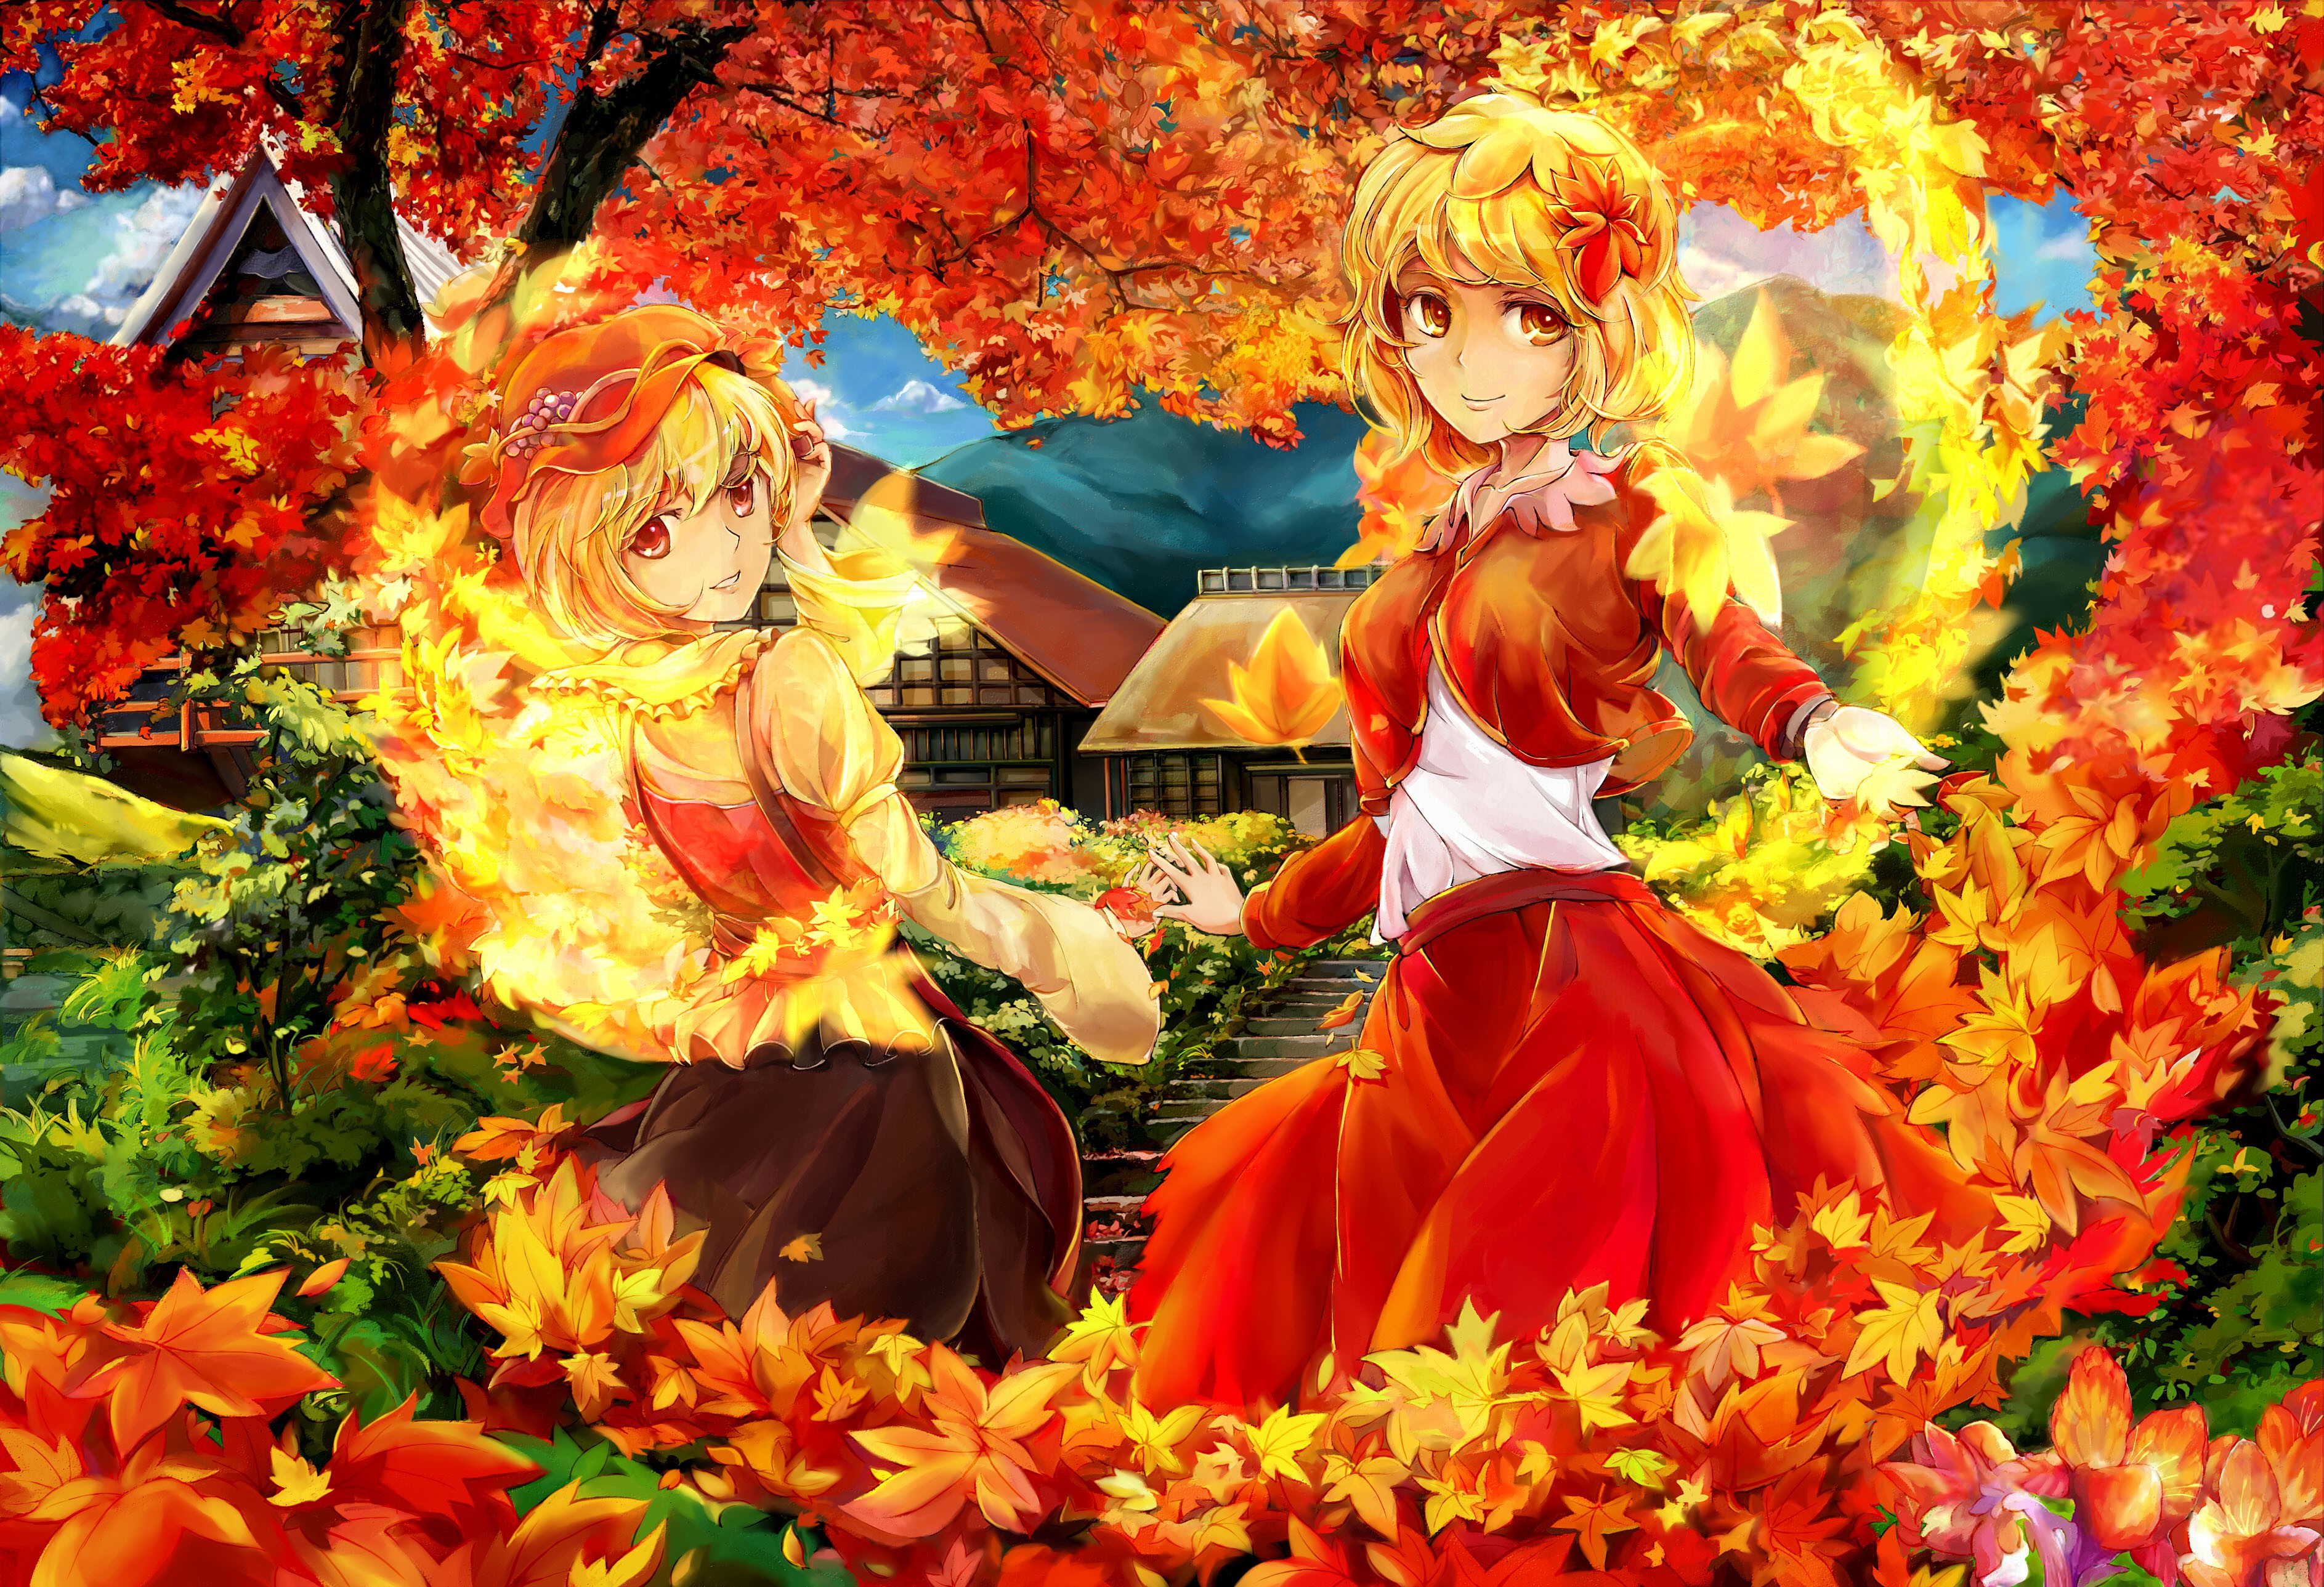 blondes, Video, Games, Mountains, Touhou, Trees, Autumn, Dress, Fruits, Leaves, Houses, Skirts, Buildings, Stairways, Goddess, Grapes, Red, Eyes, Short, Hair, Mountain, Of, Faith, Red, Dress, Sisters, Aprons, Or Wallpaper